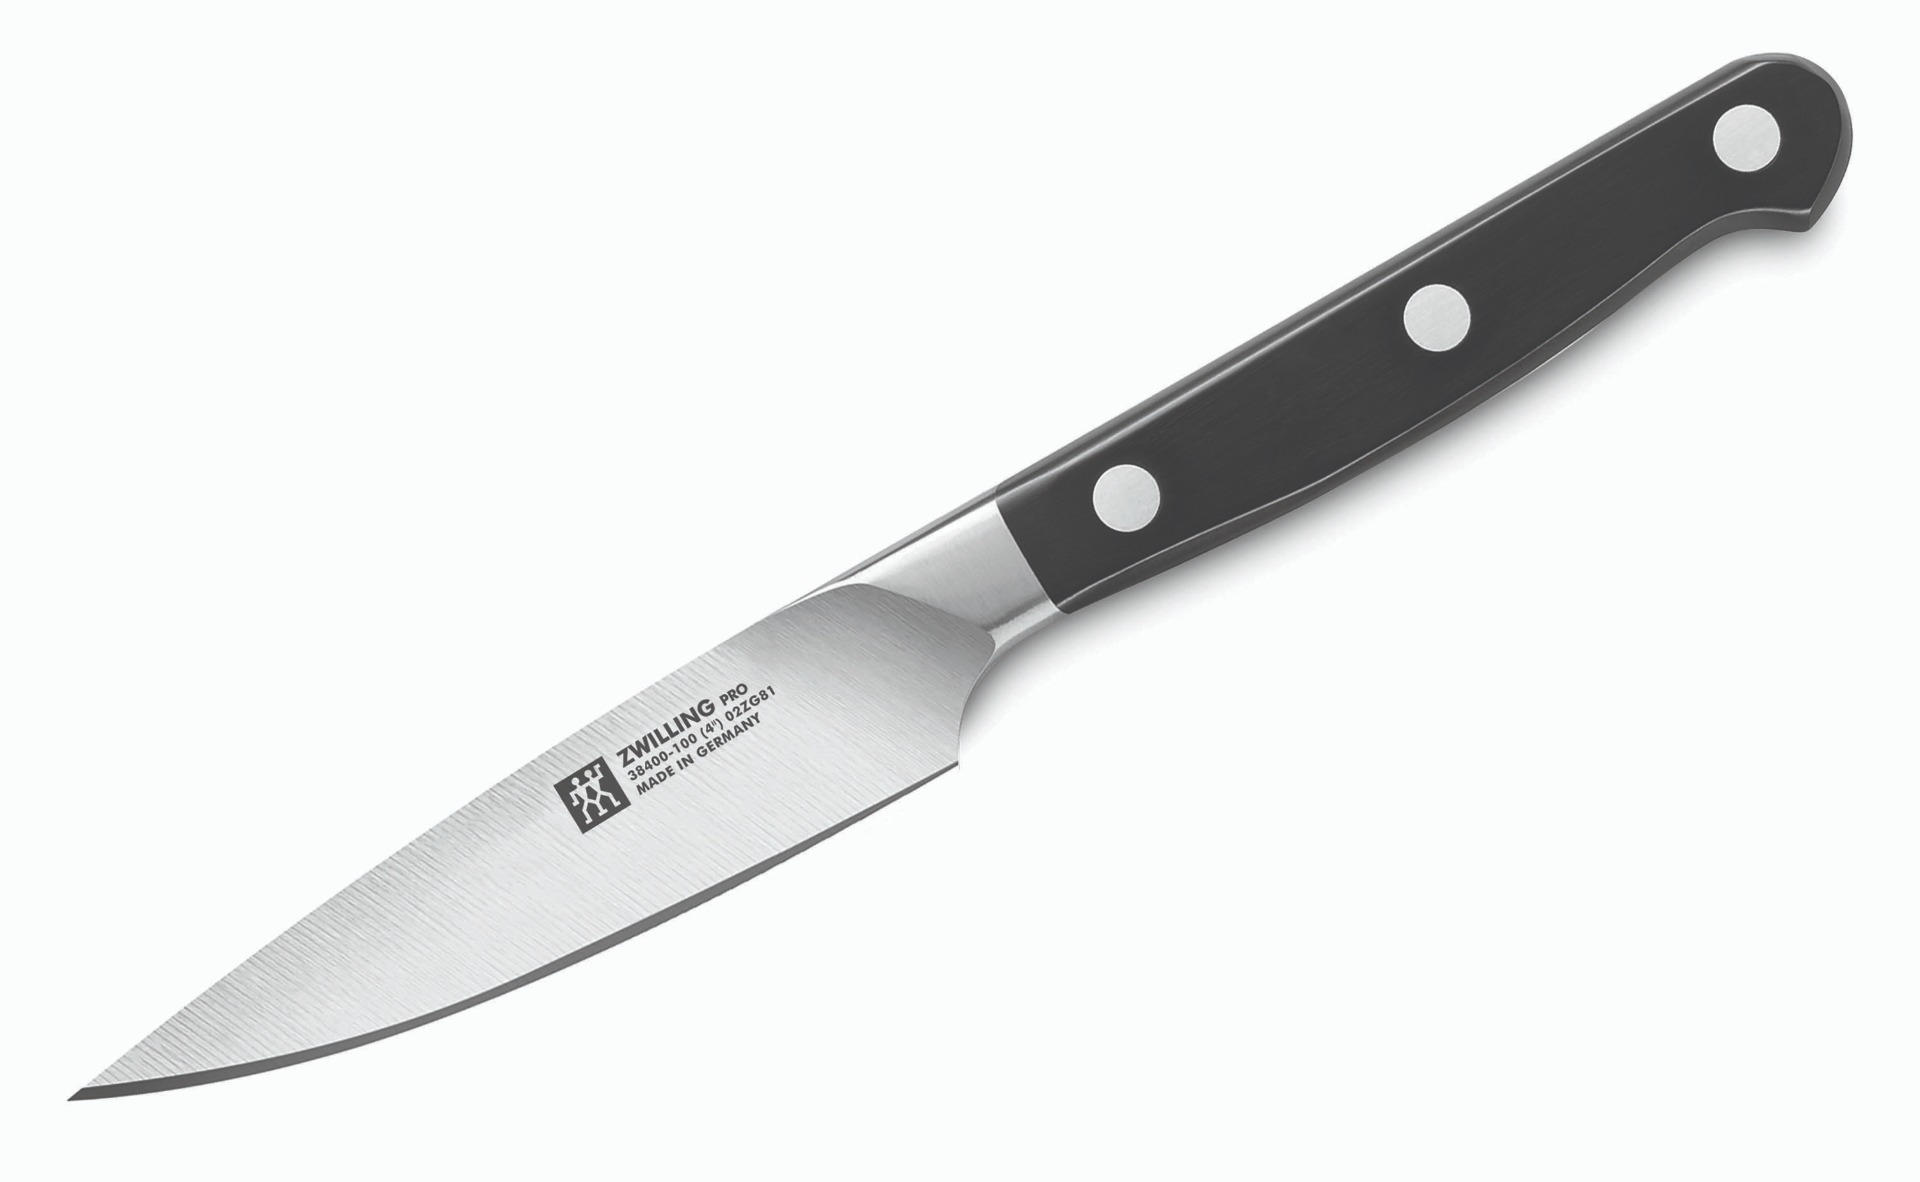 Zwilling Knife